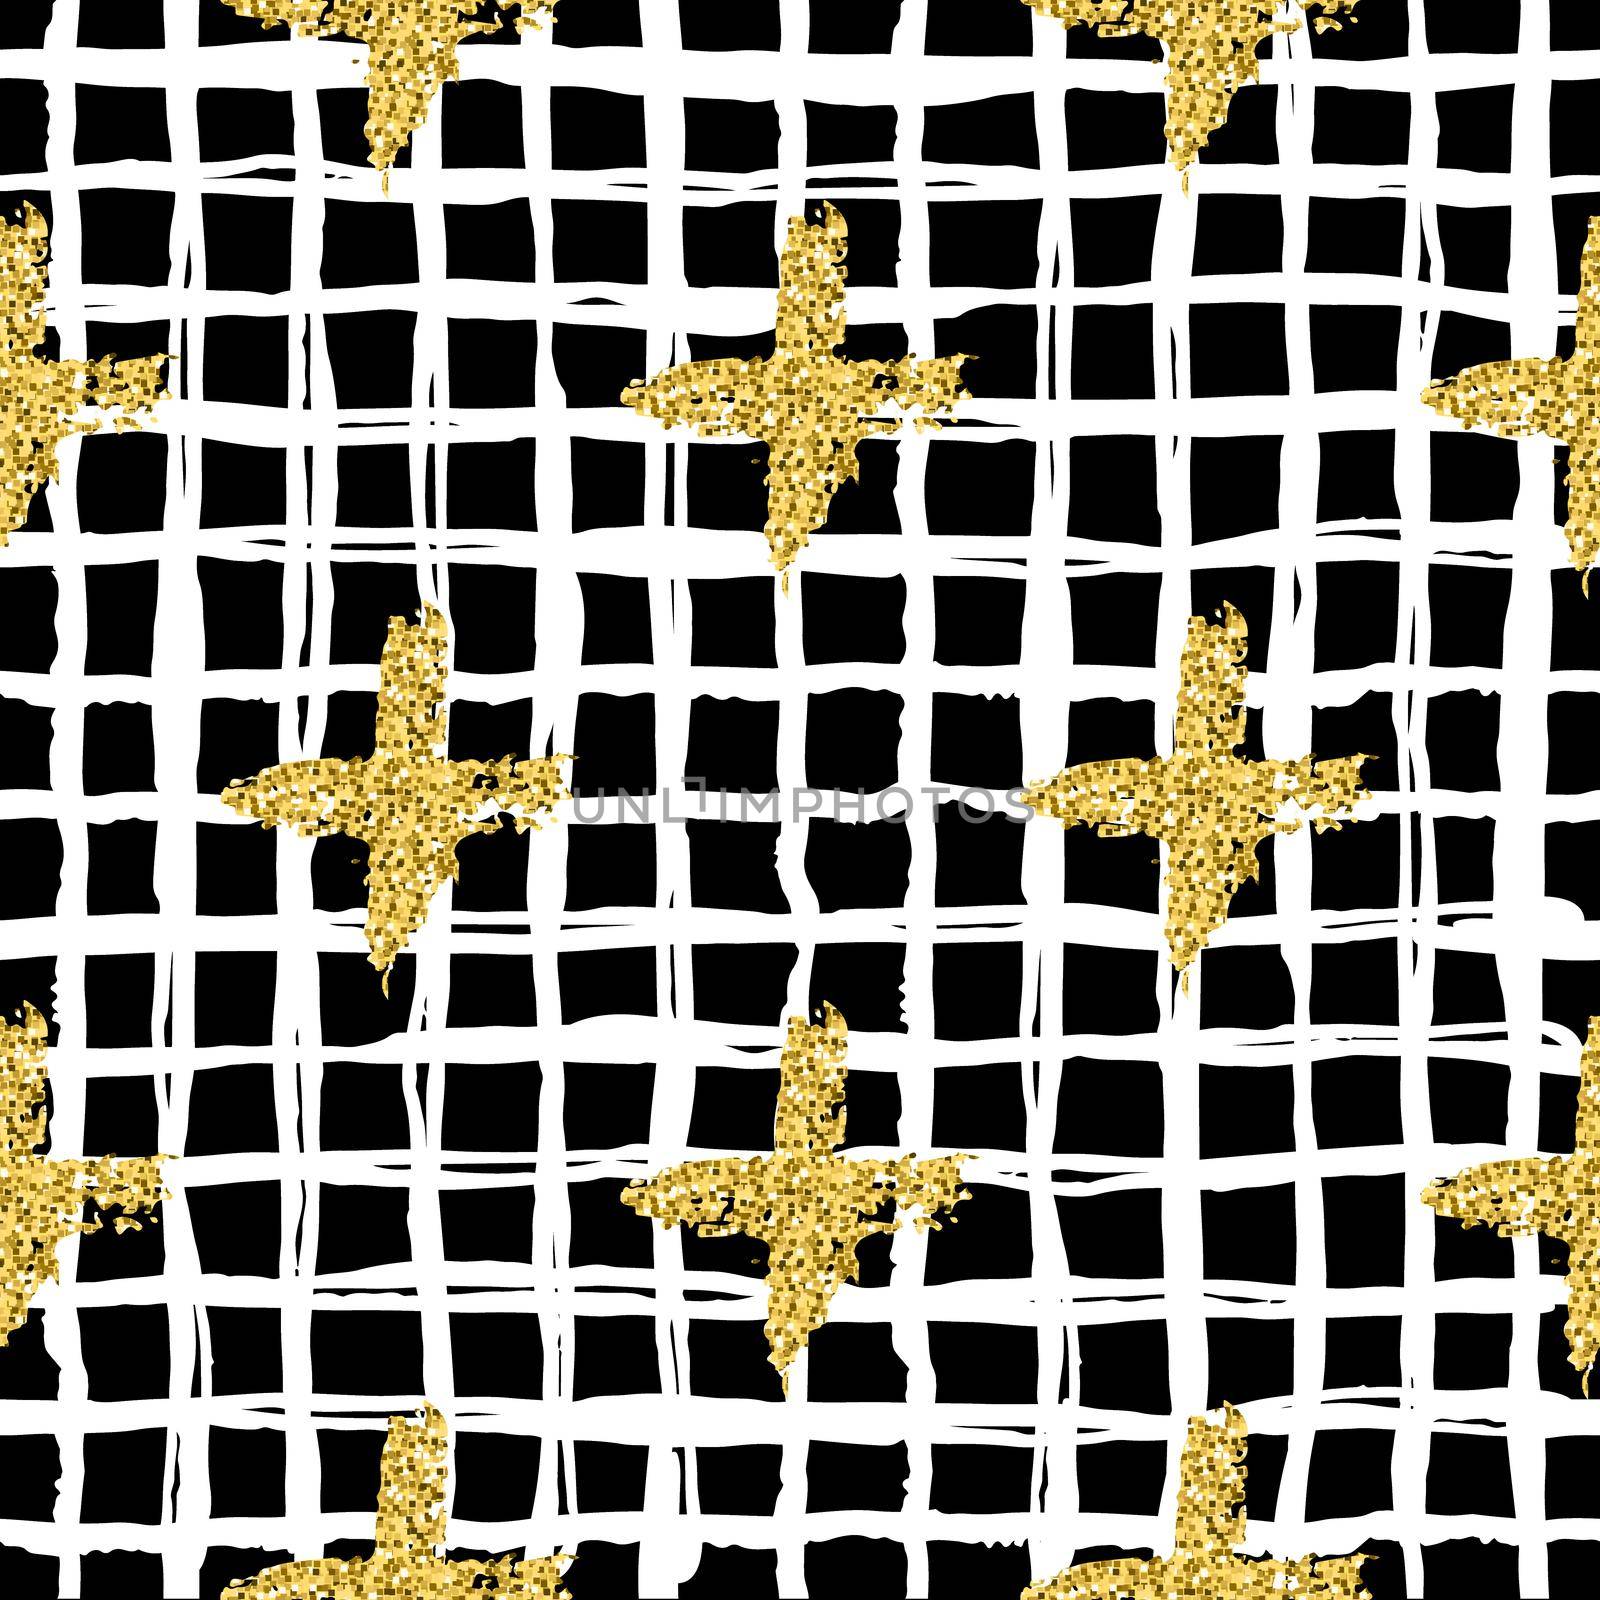 Modern seamless pattern with brush stripes plaid and cross. White, gold metallic color on black background. Golden glitter texture. Ink geometric elements. Fashion catwalk style. Repeat fabric cloth by DesignAB